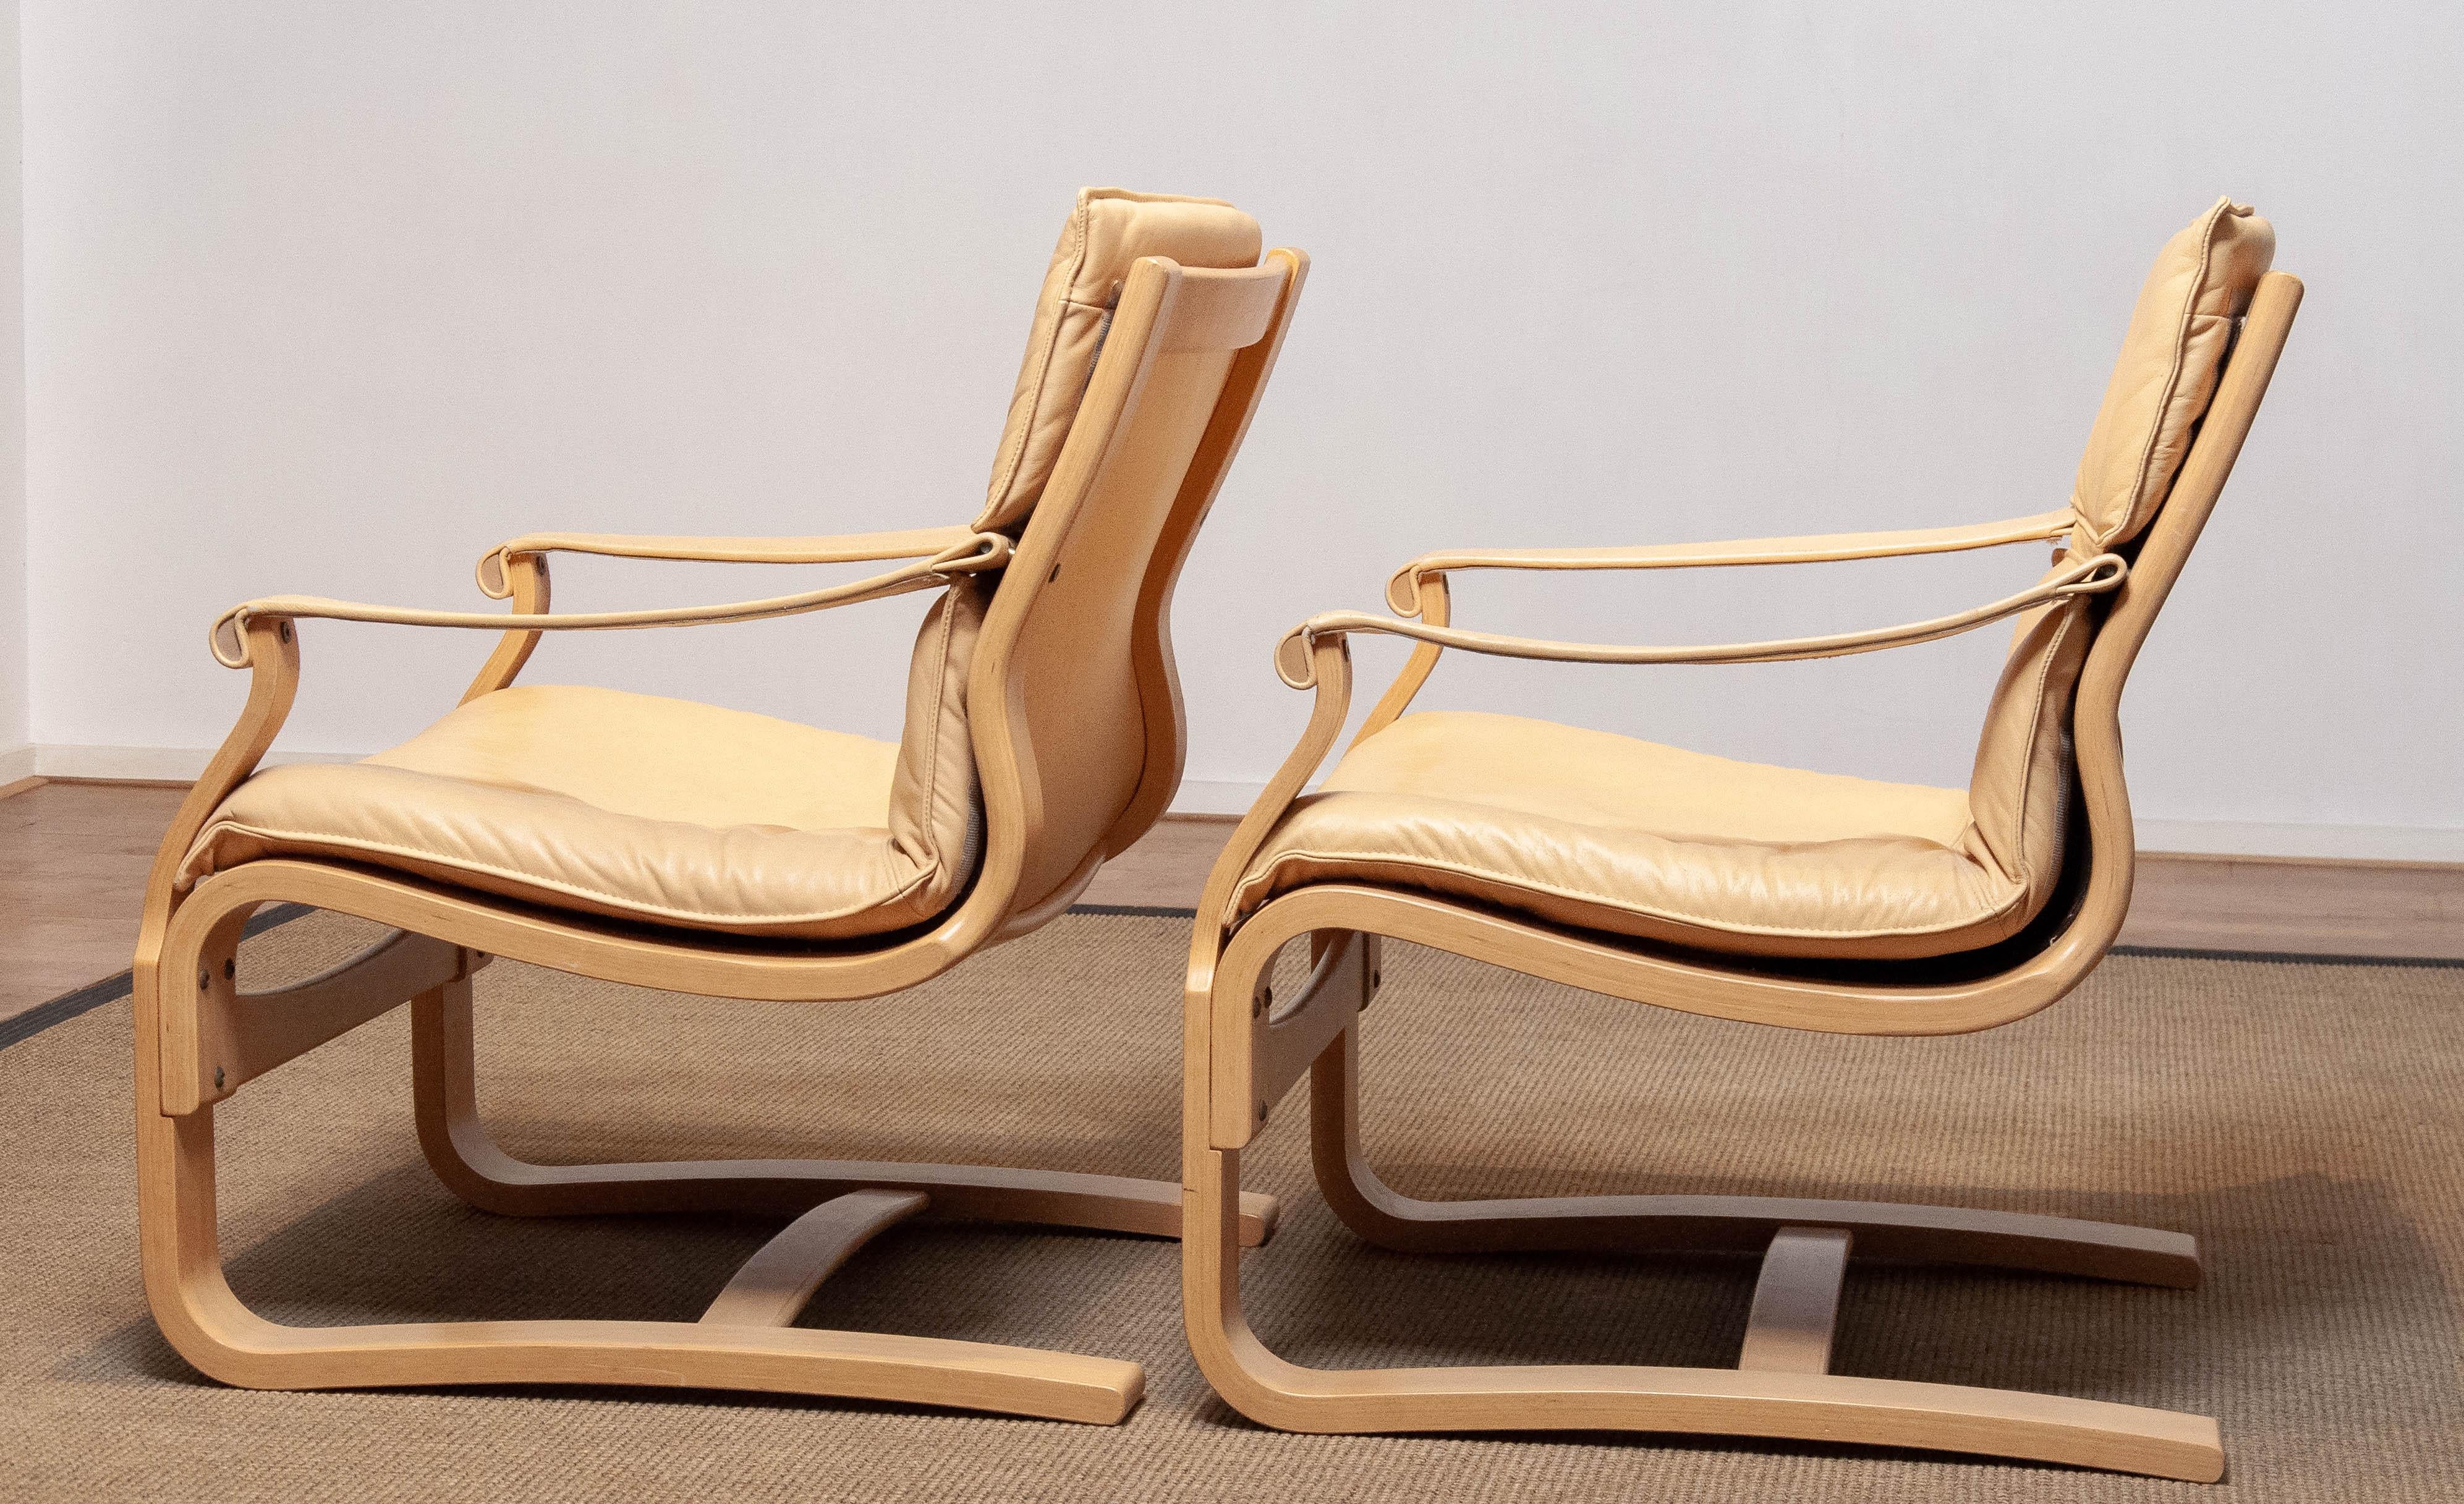 Pair Bentwood with Beige / Creme Leather Lounge Chairs by Ake Fribytter for Nelo In Good Condition For Sale In Silvolde, Gelderland